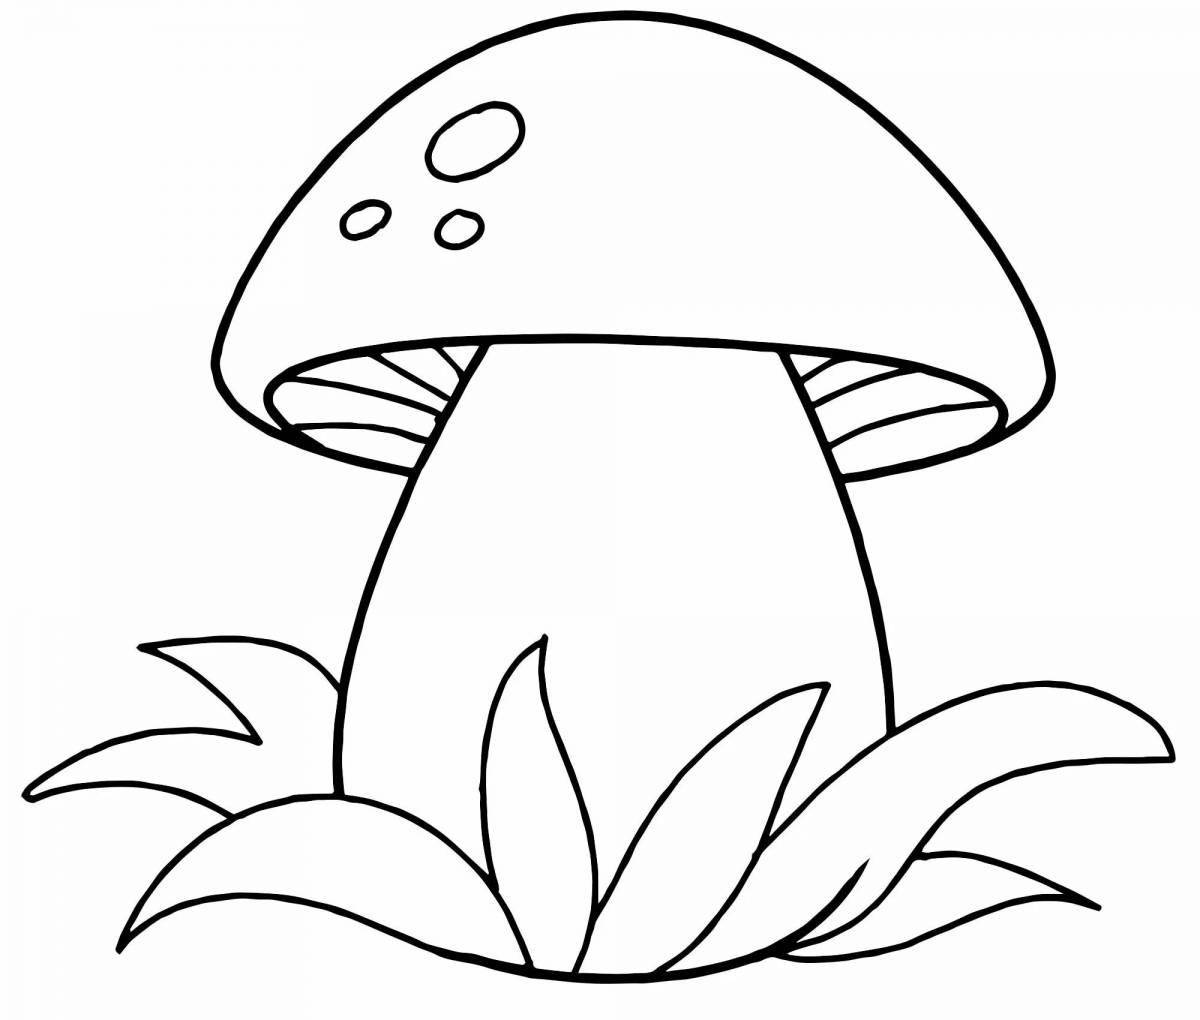 Exquisite mushroom coloring book for 4-5 year olds